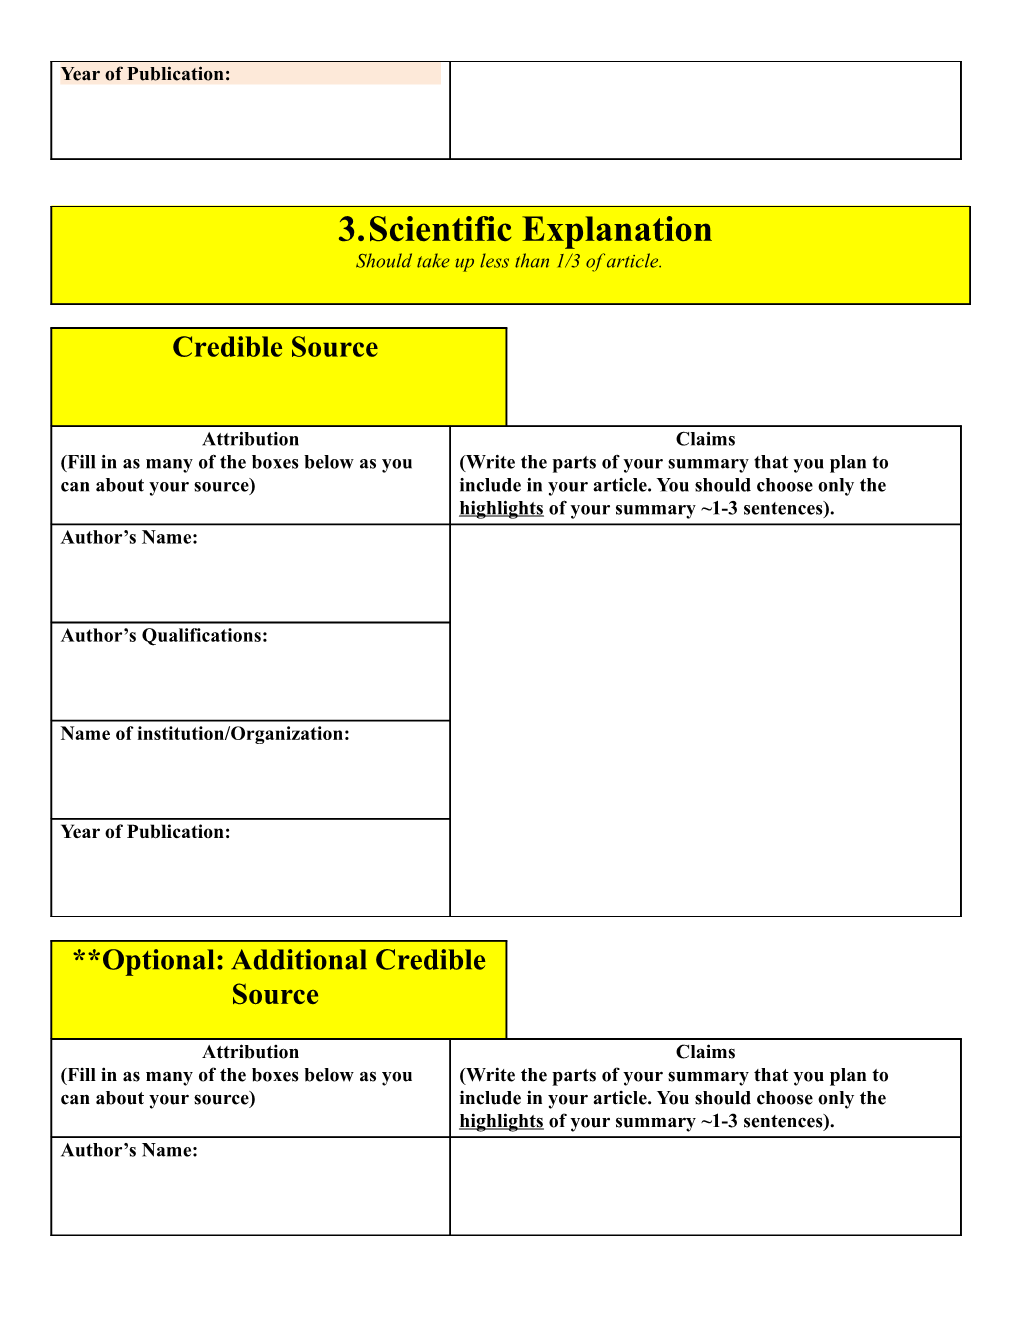 &gt;As You Complete Each Section of the Graphic Organizer, Check the Boxes to Monitor